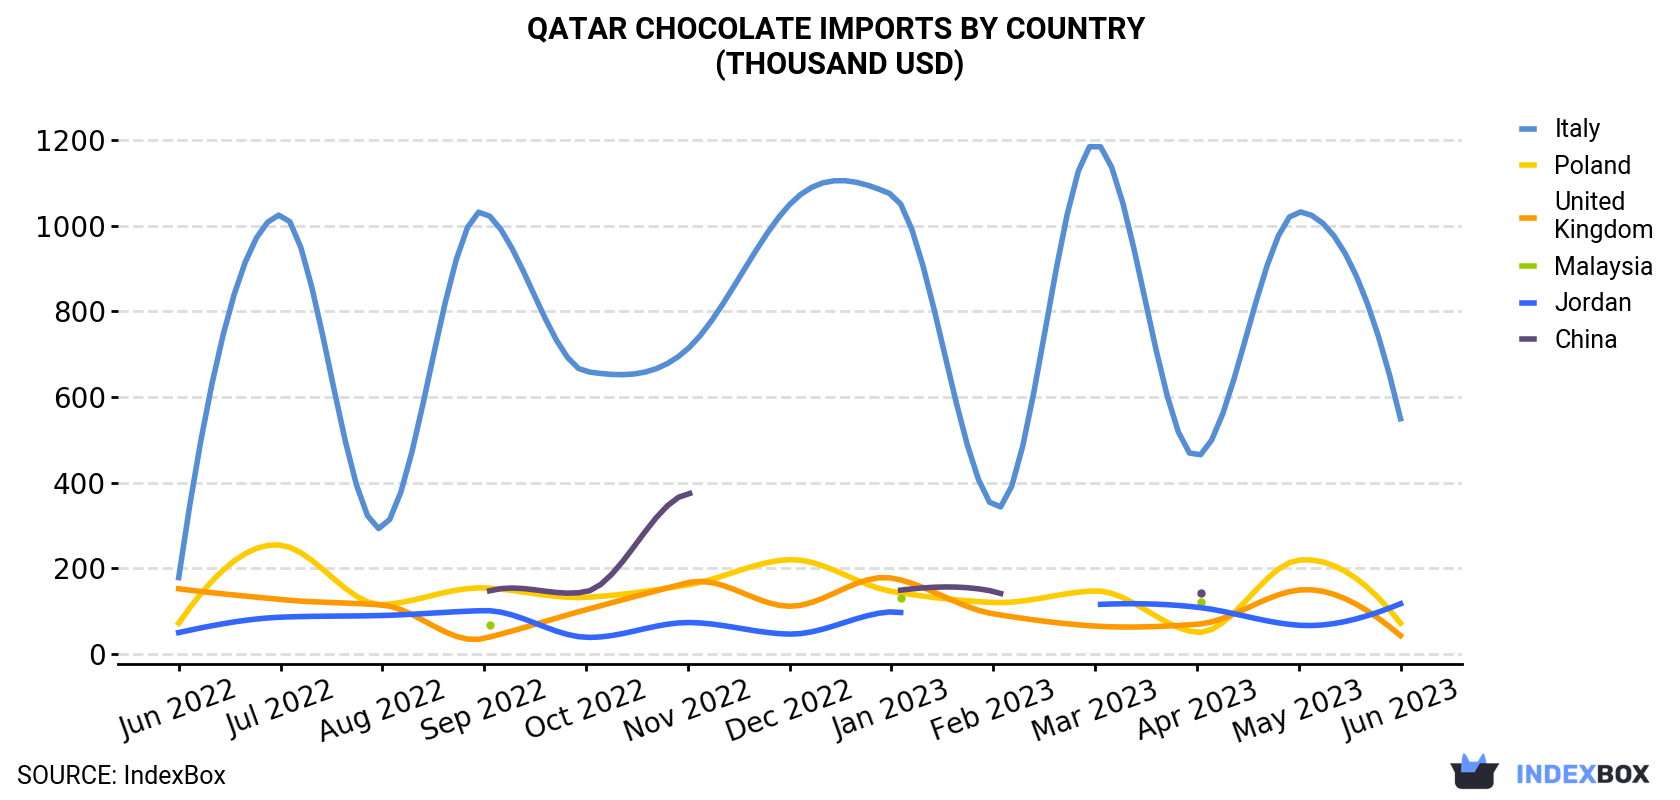 Qatar Chocolate Imports By Country (Thousand USD)